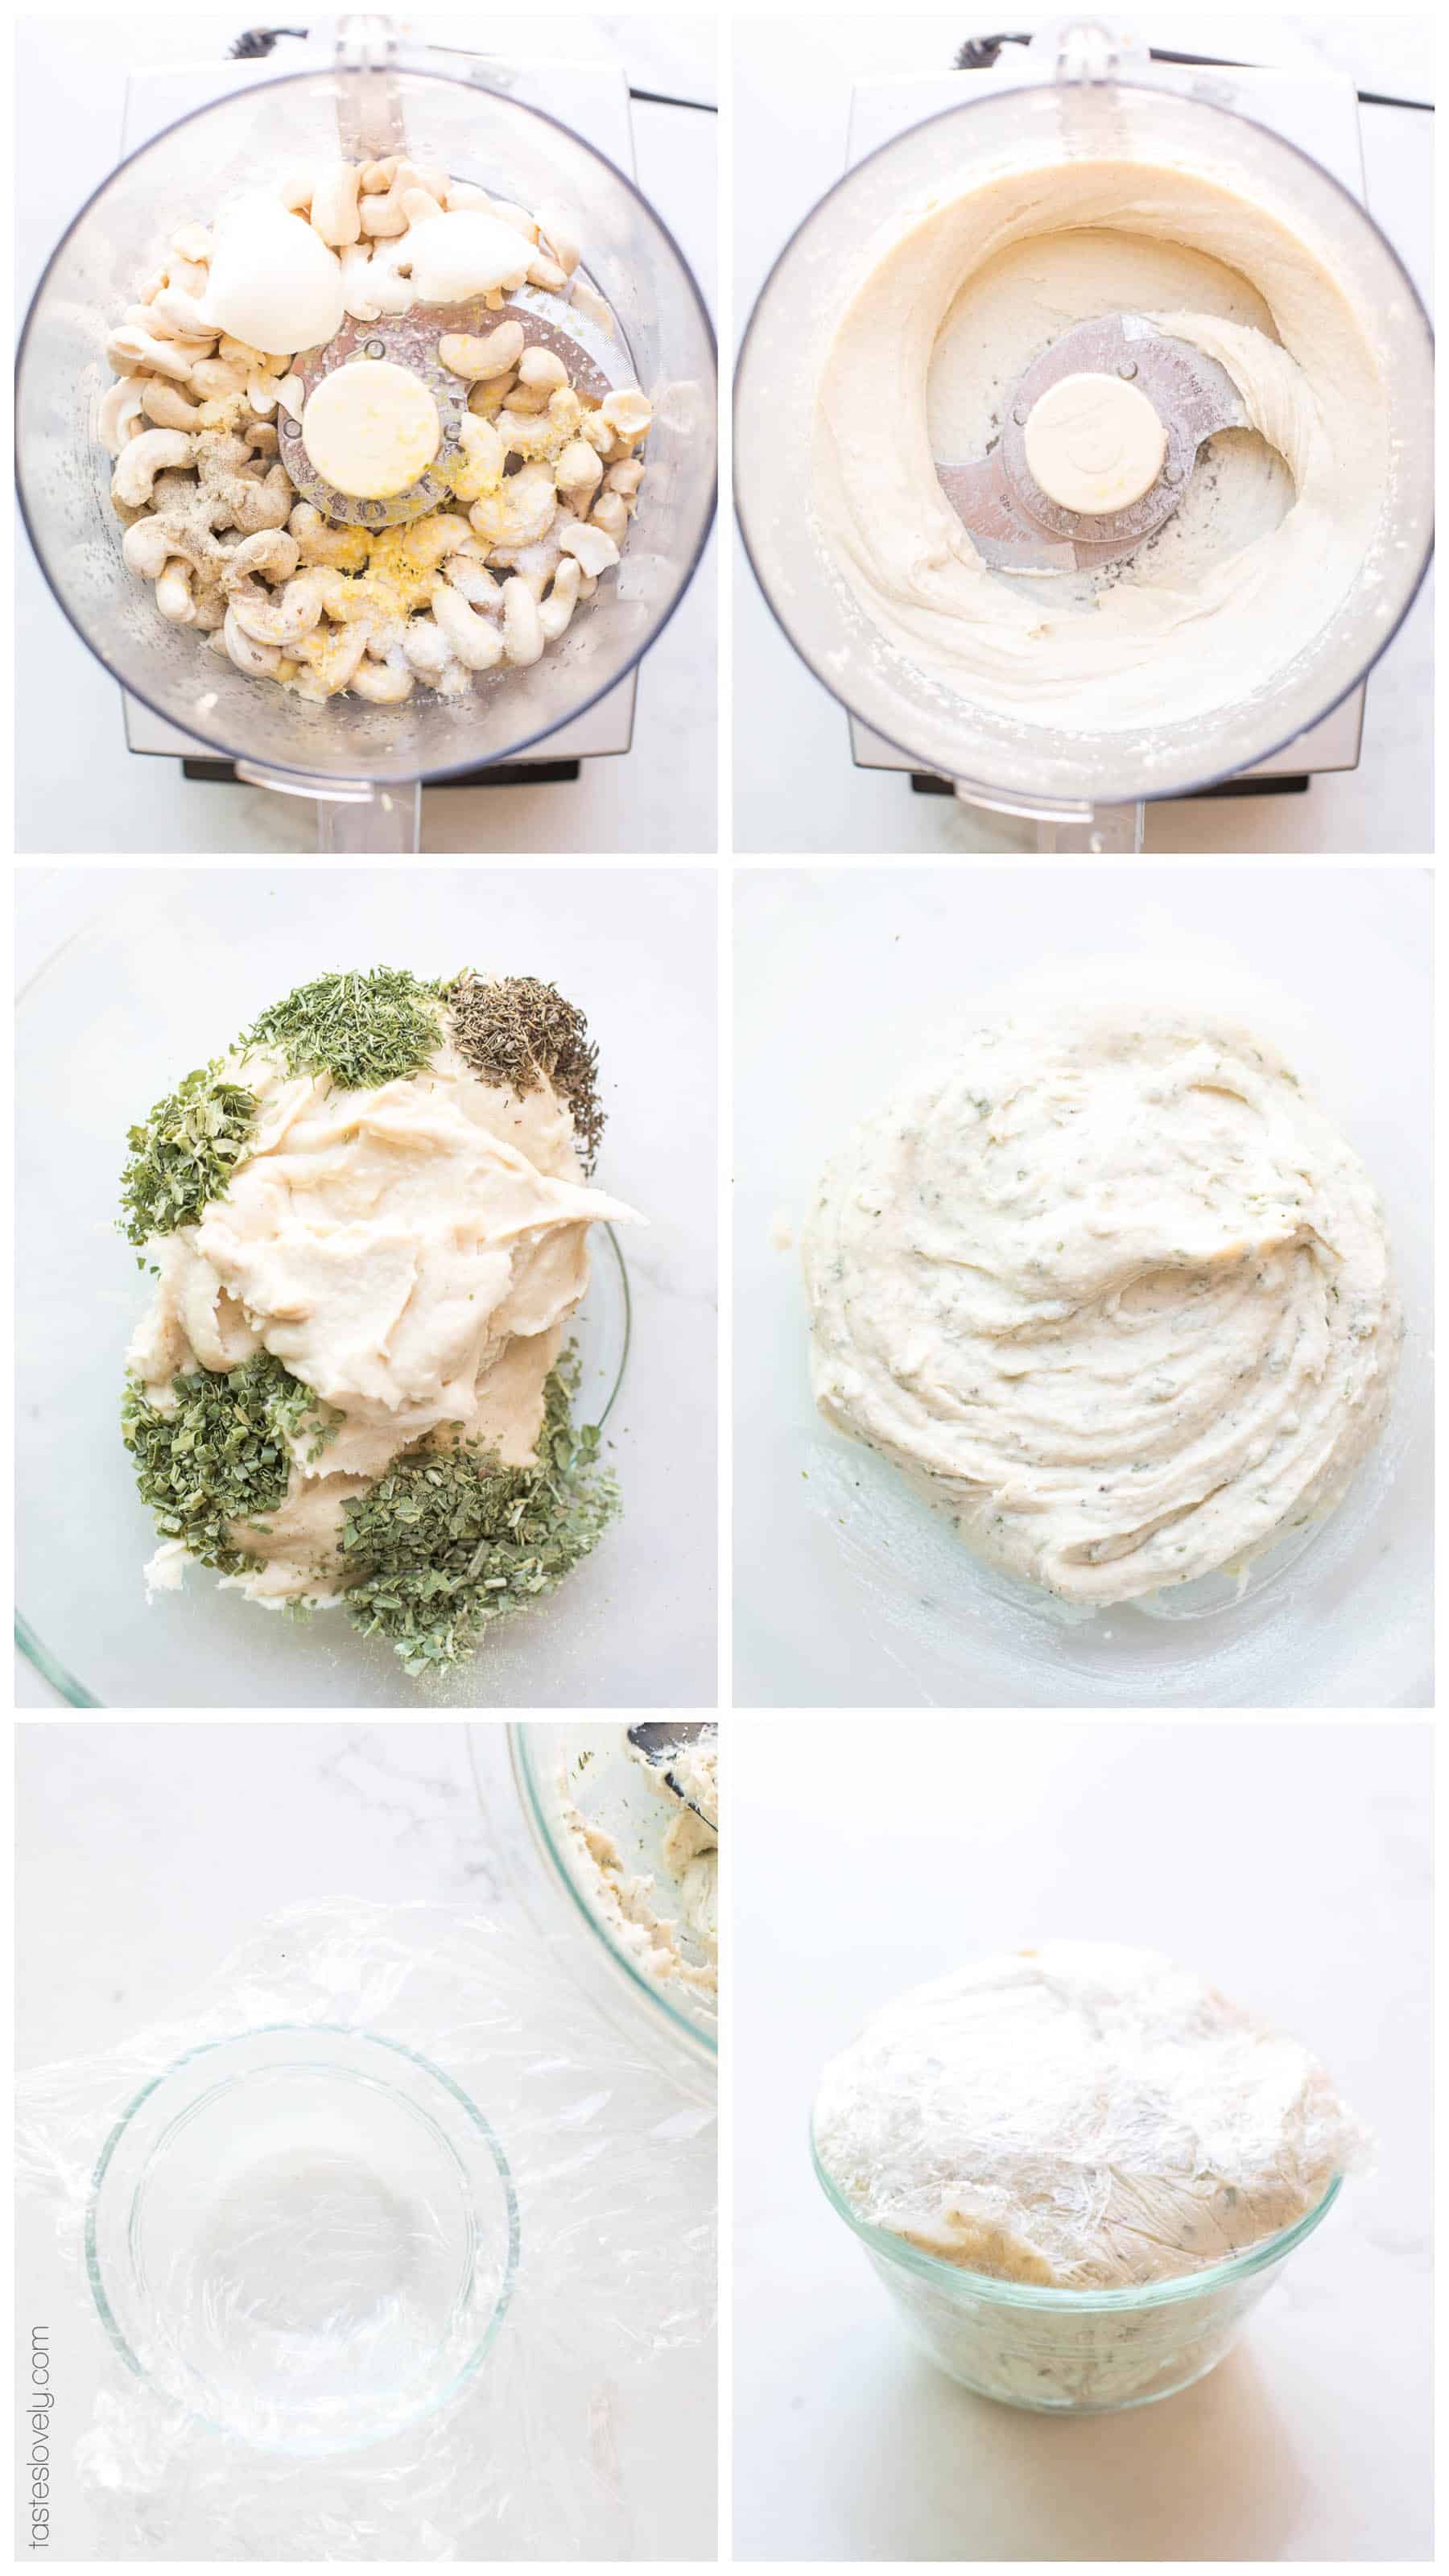 steps of making cashew cheese